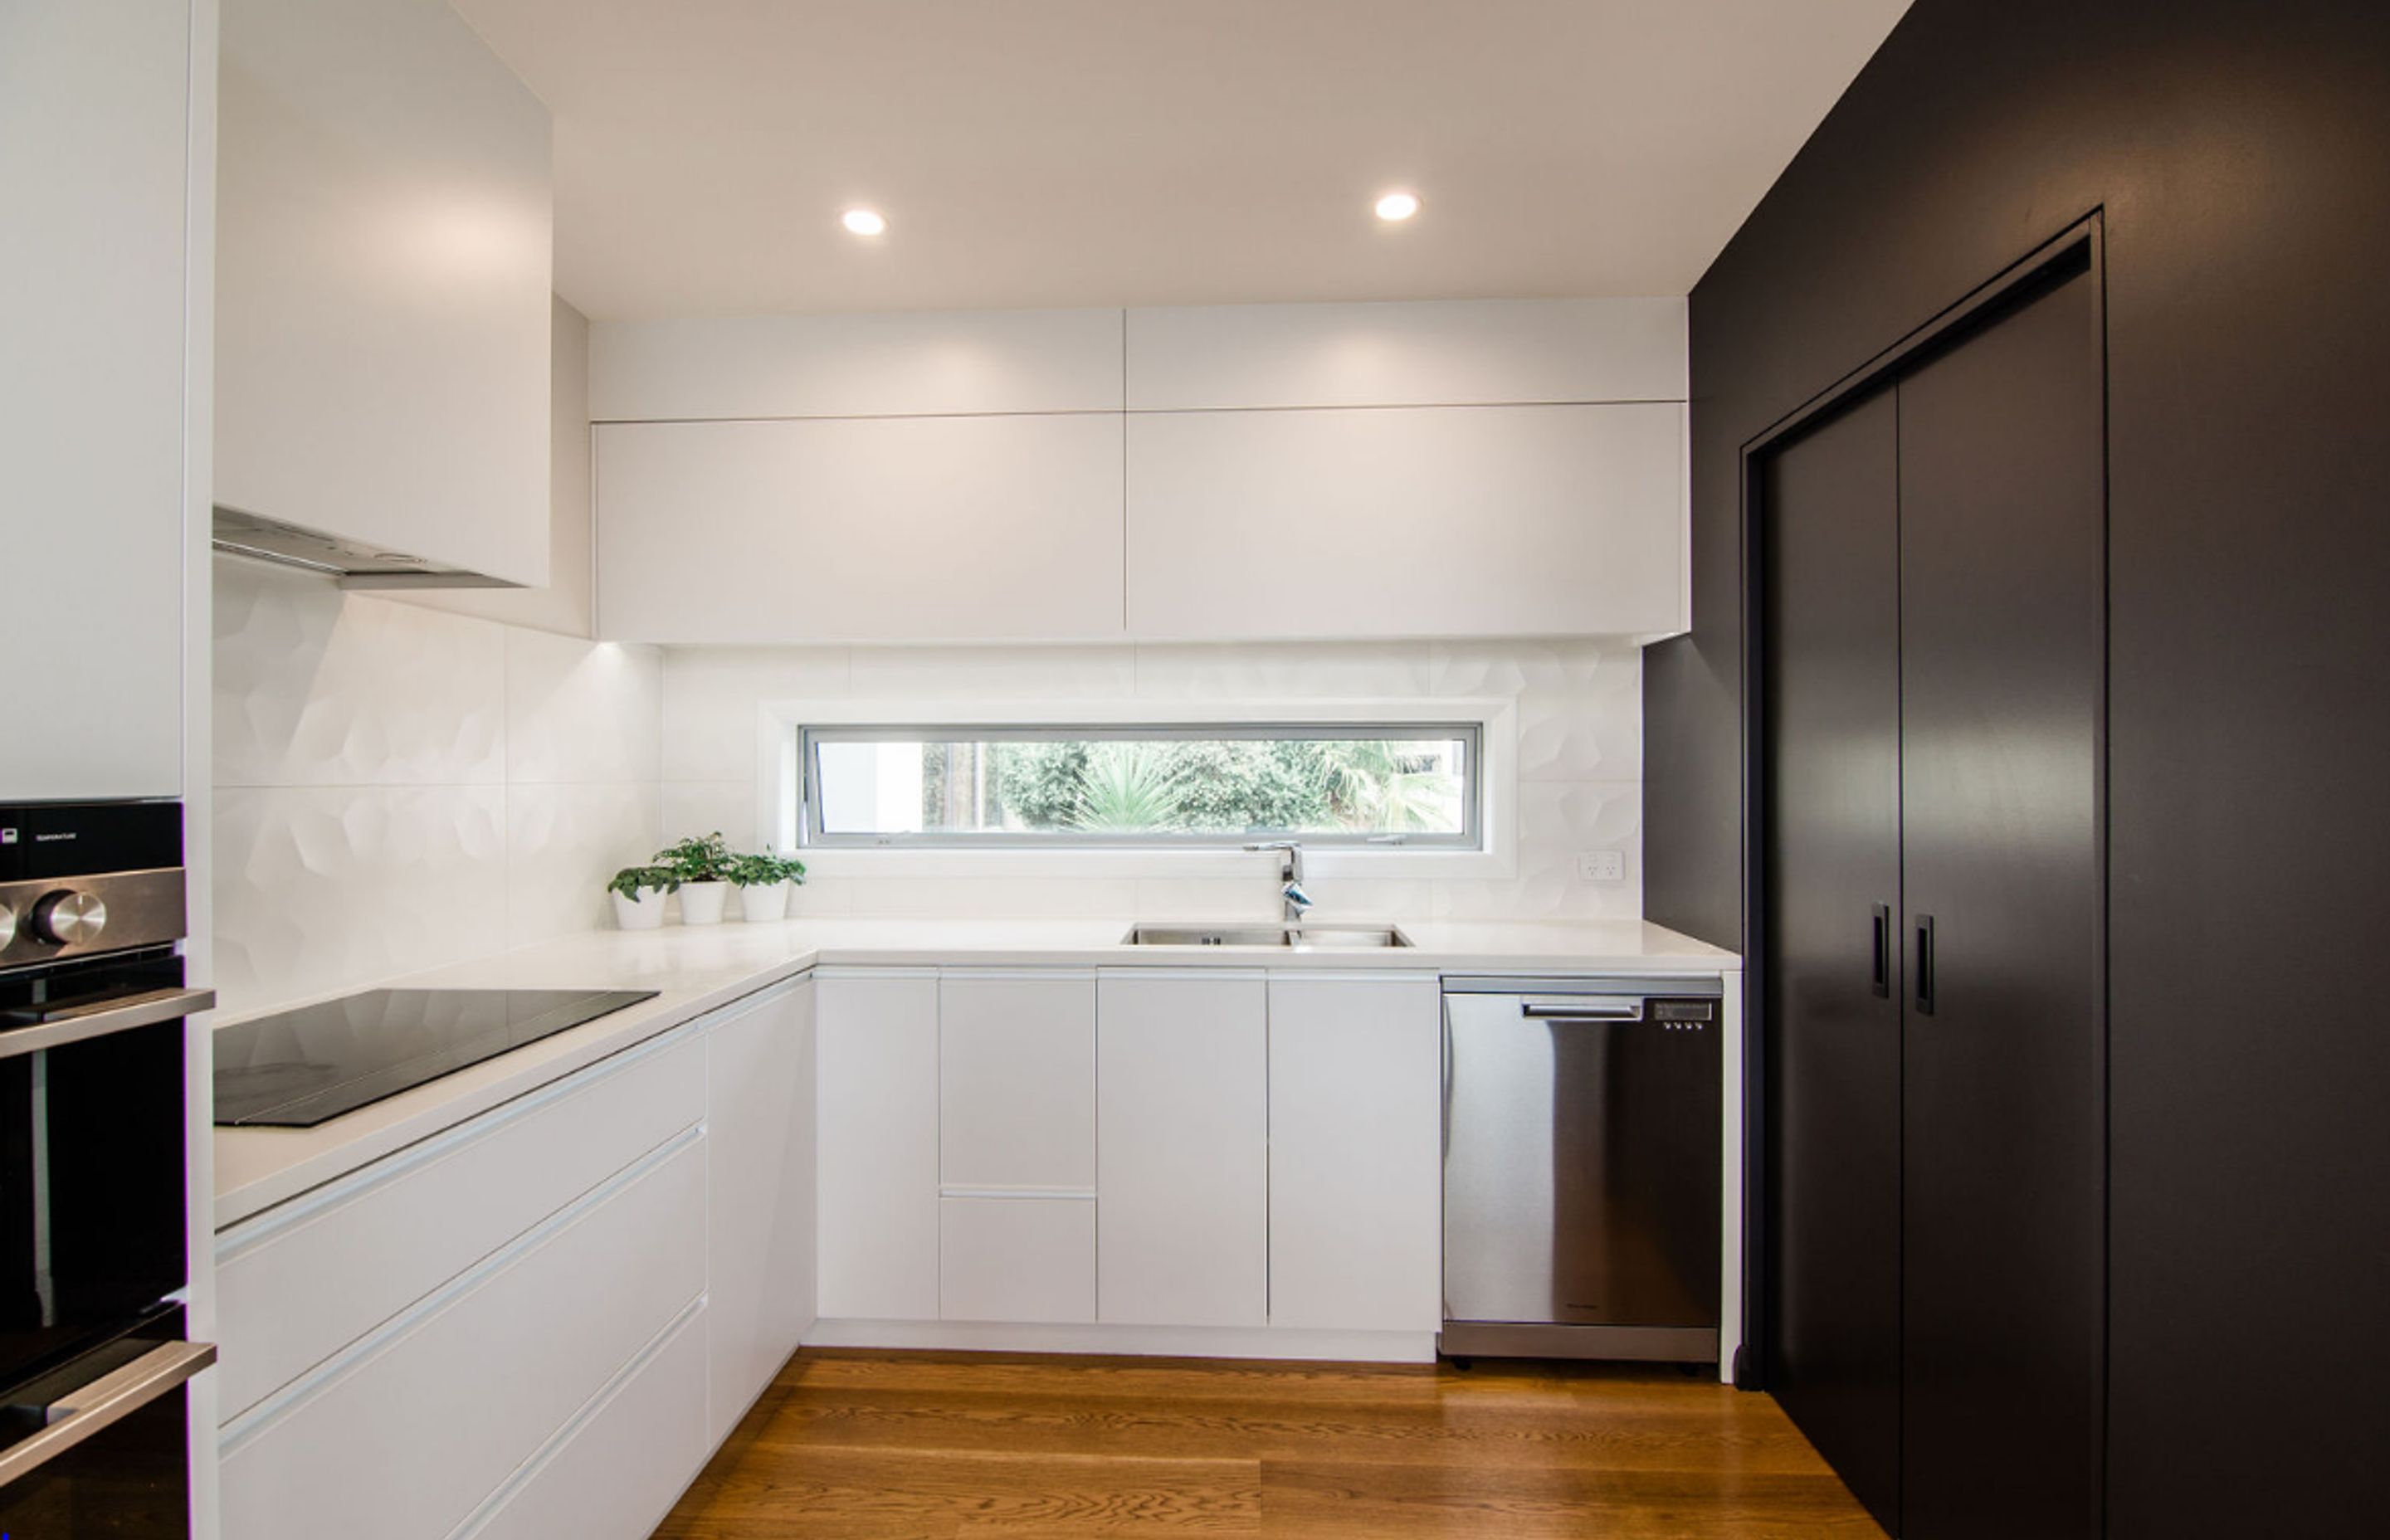 Sleek Black and White kitchen, the scullery is incorporated behind the black cavity sliders.